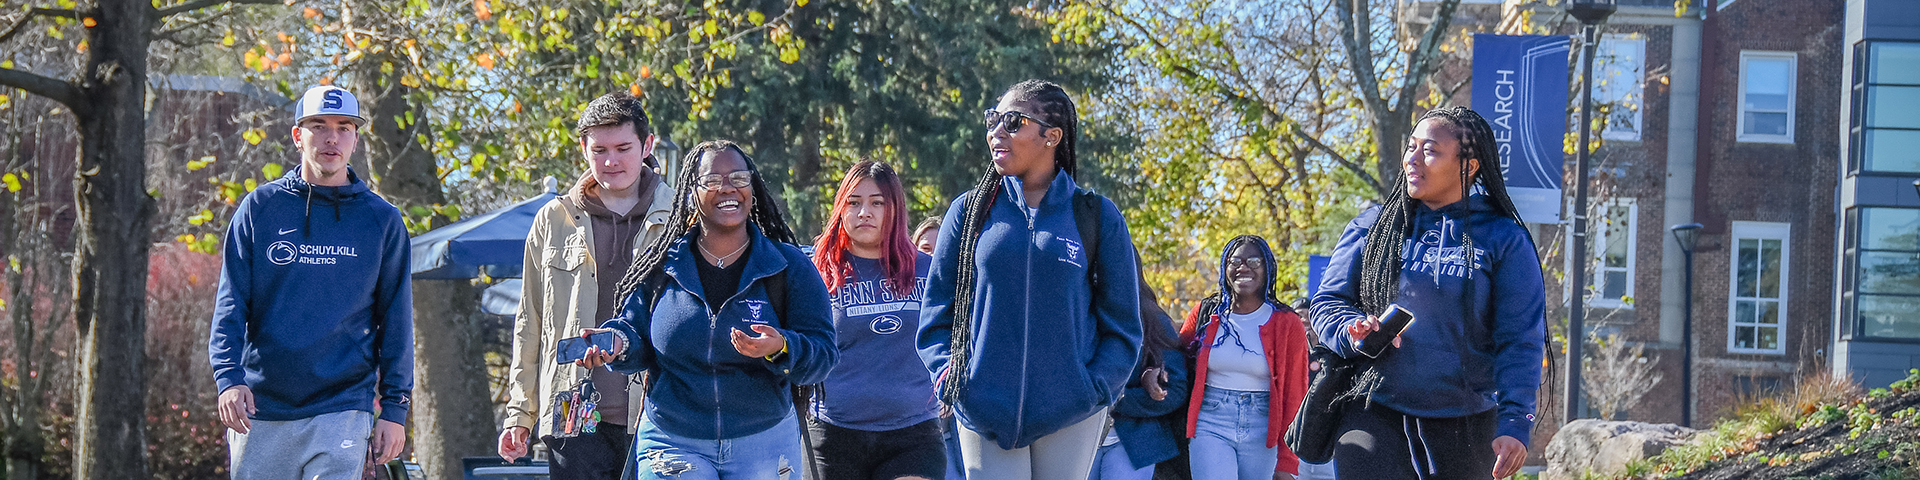 group of students walking on campus mall walk